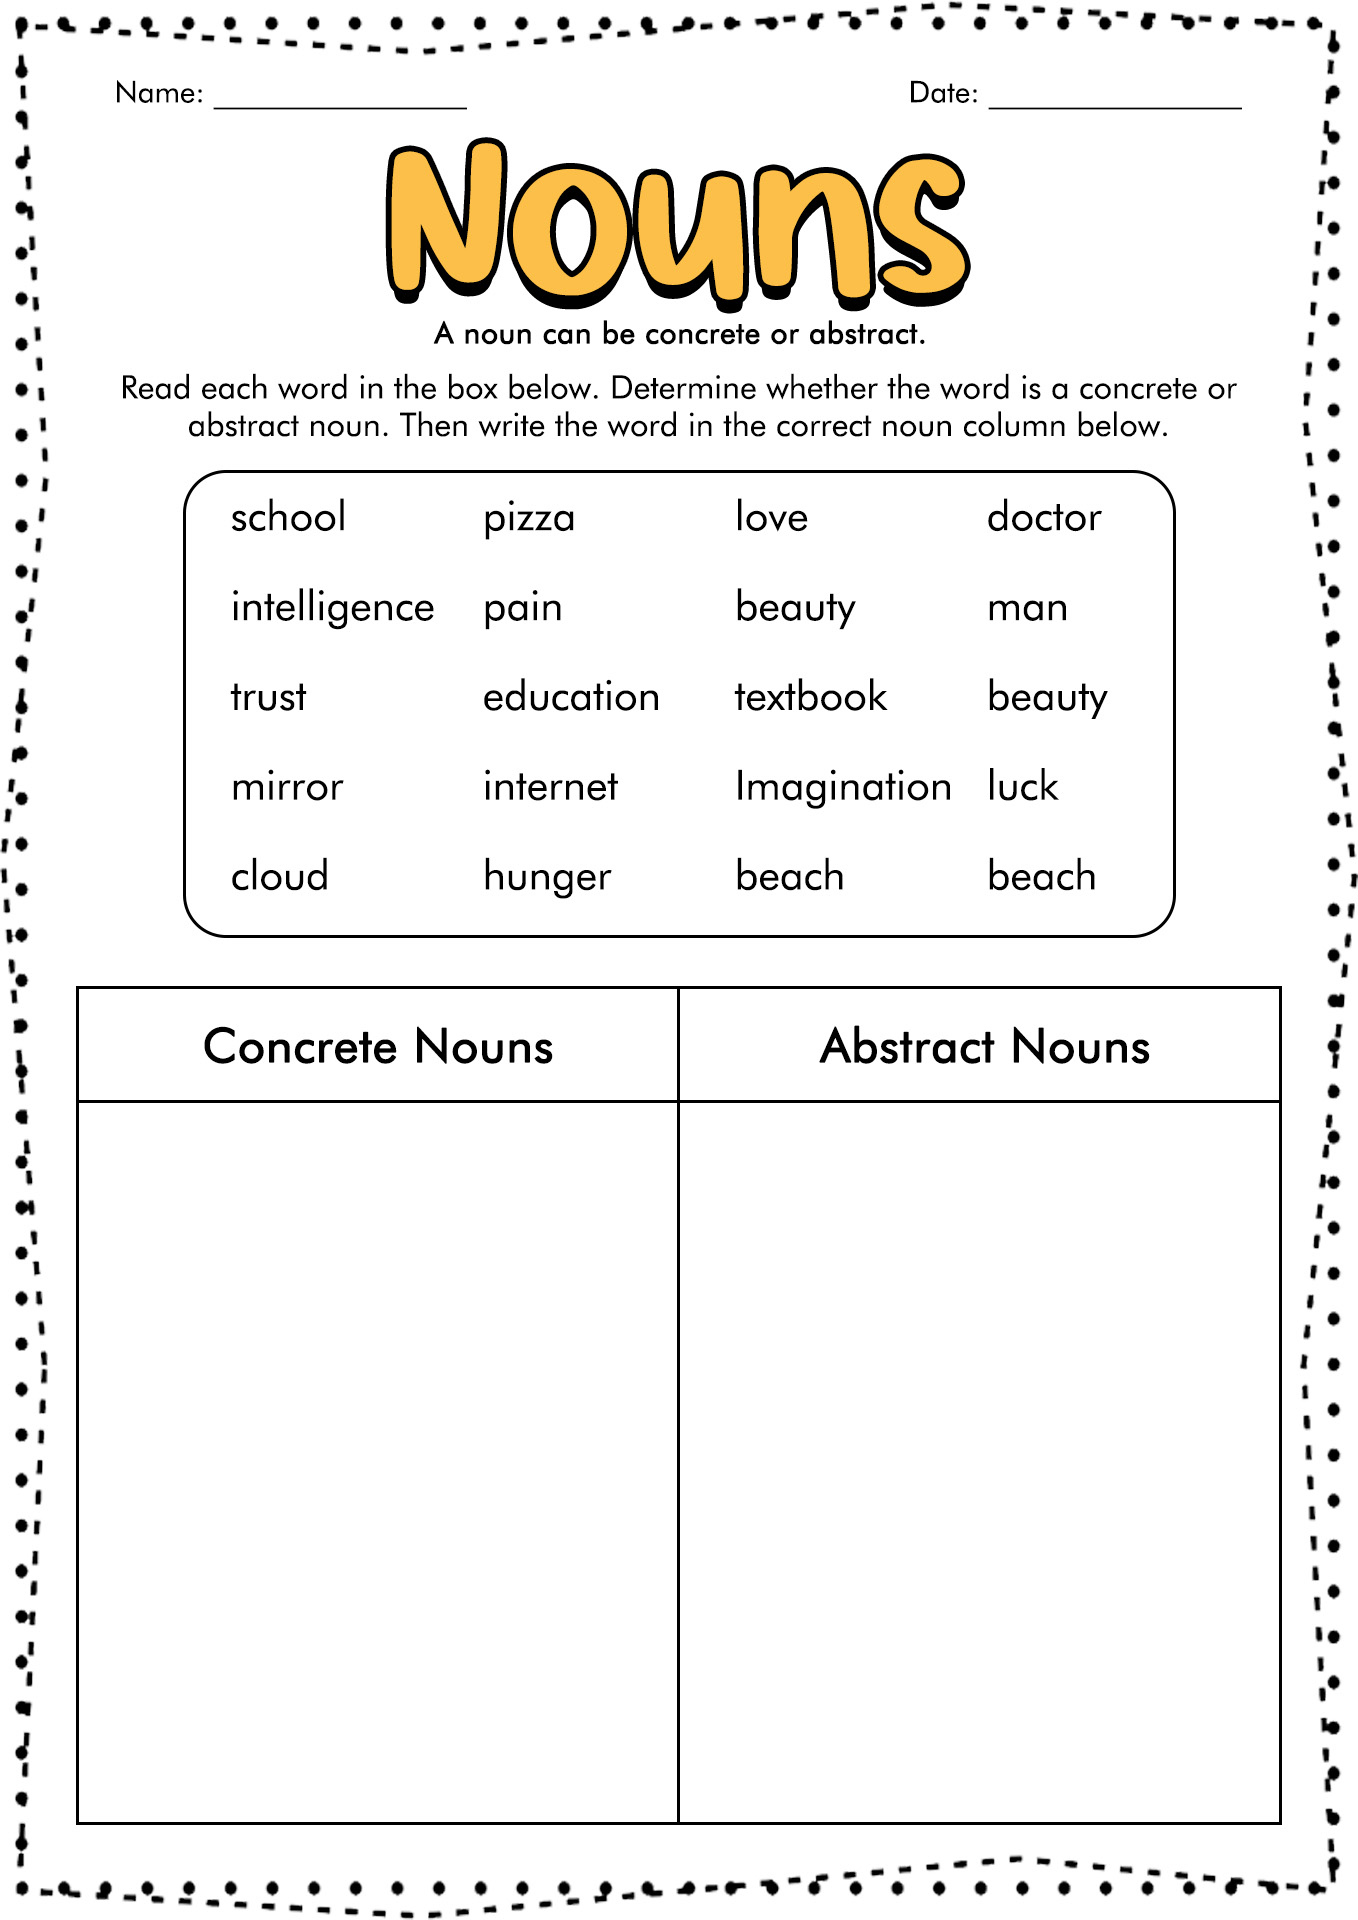 Abstract Concrete Nouns Worksheet Image